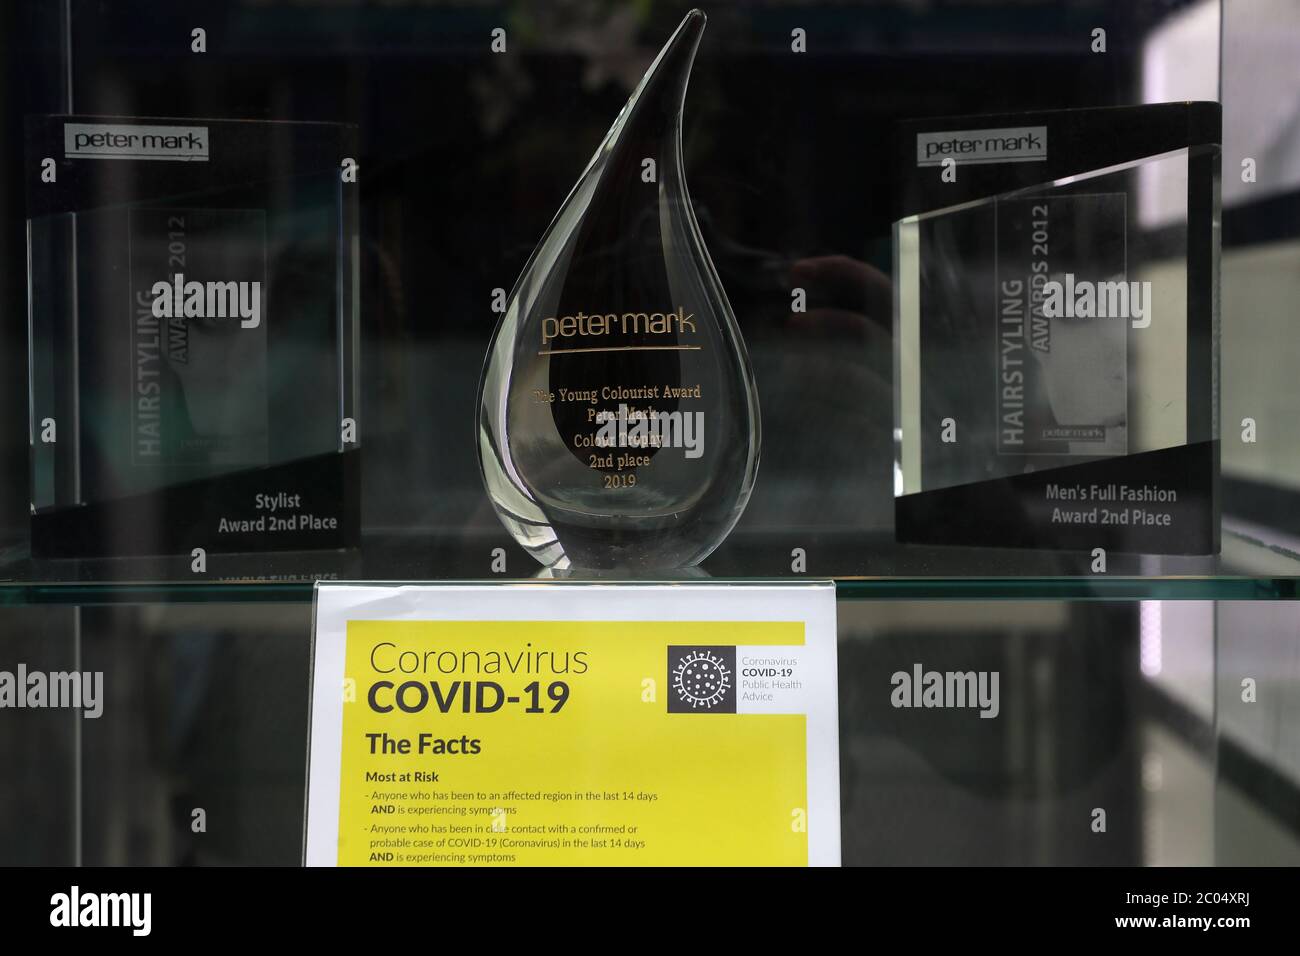 Information on coronavirus alongside a hair dressing award in a shop window on Grafton street in Dublin as hairdressers may be allowed to reopen earlier than previously planned as lockdown restrictions continue to be lifted. Stock Photo